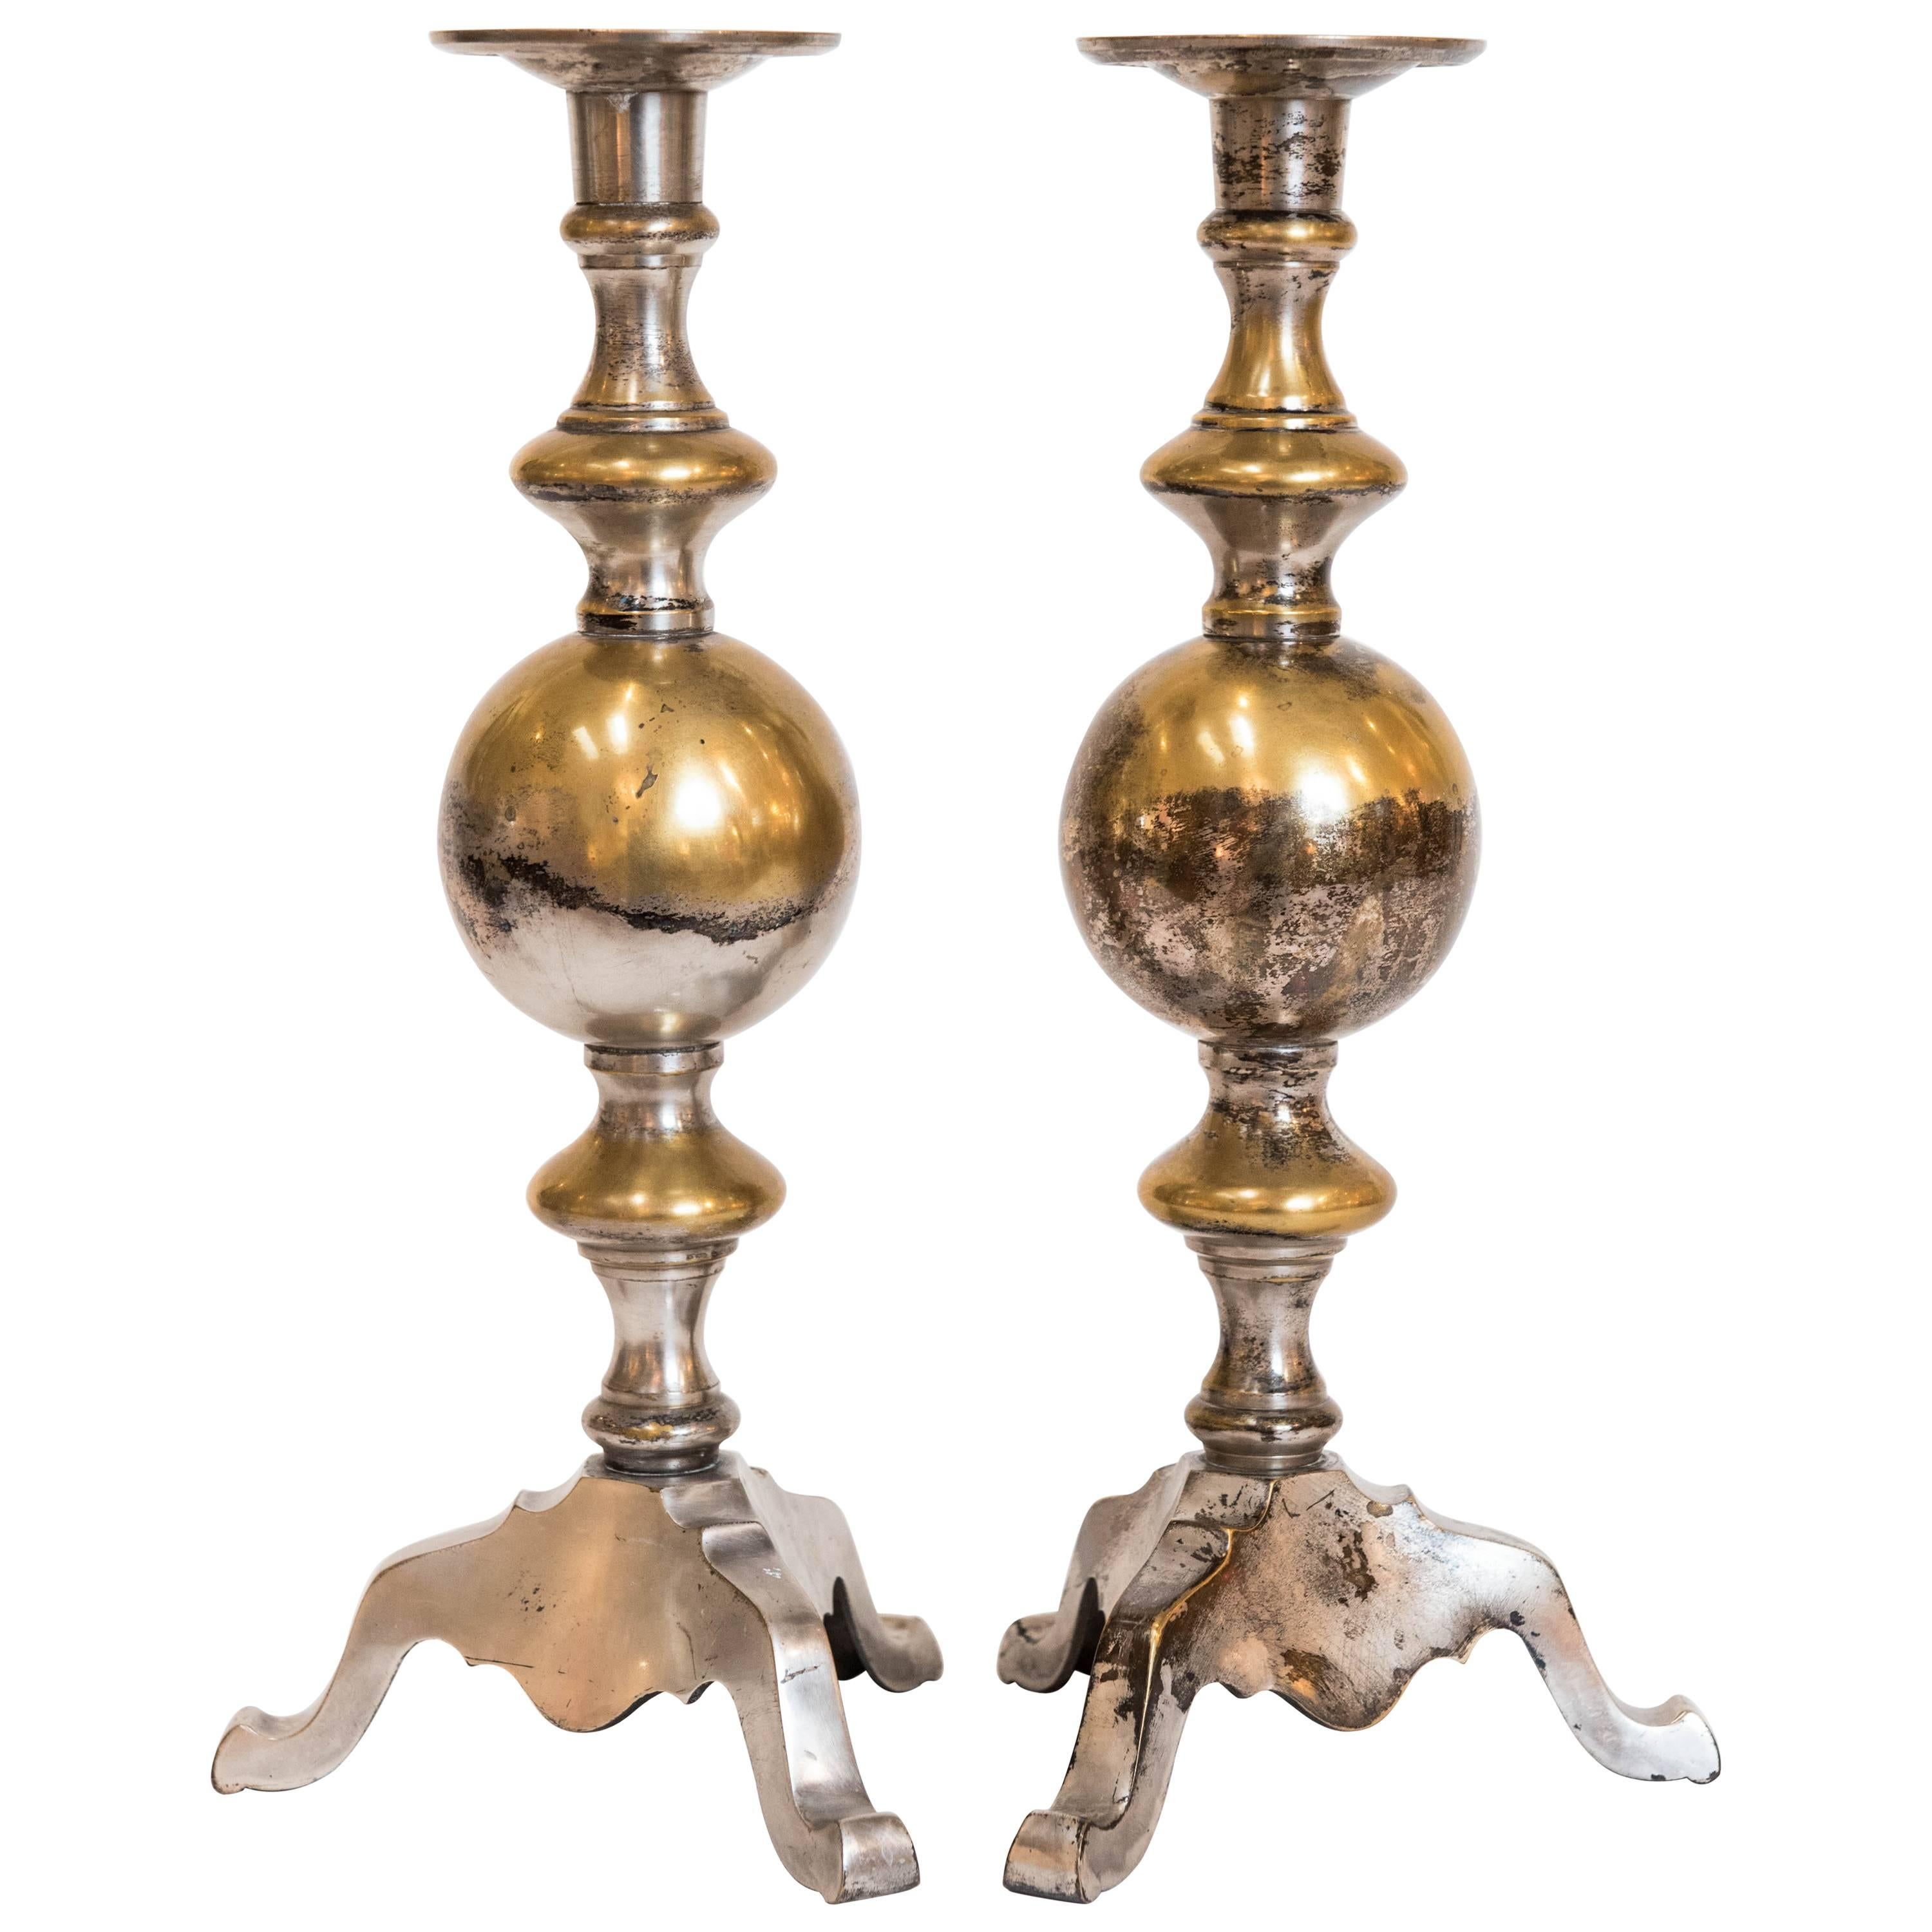 Pair of Brass and Silver Plated British Colonial Candlesticks